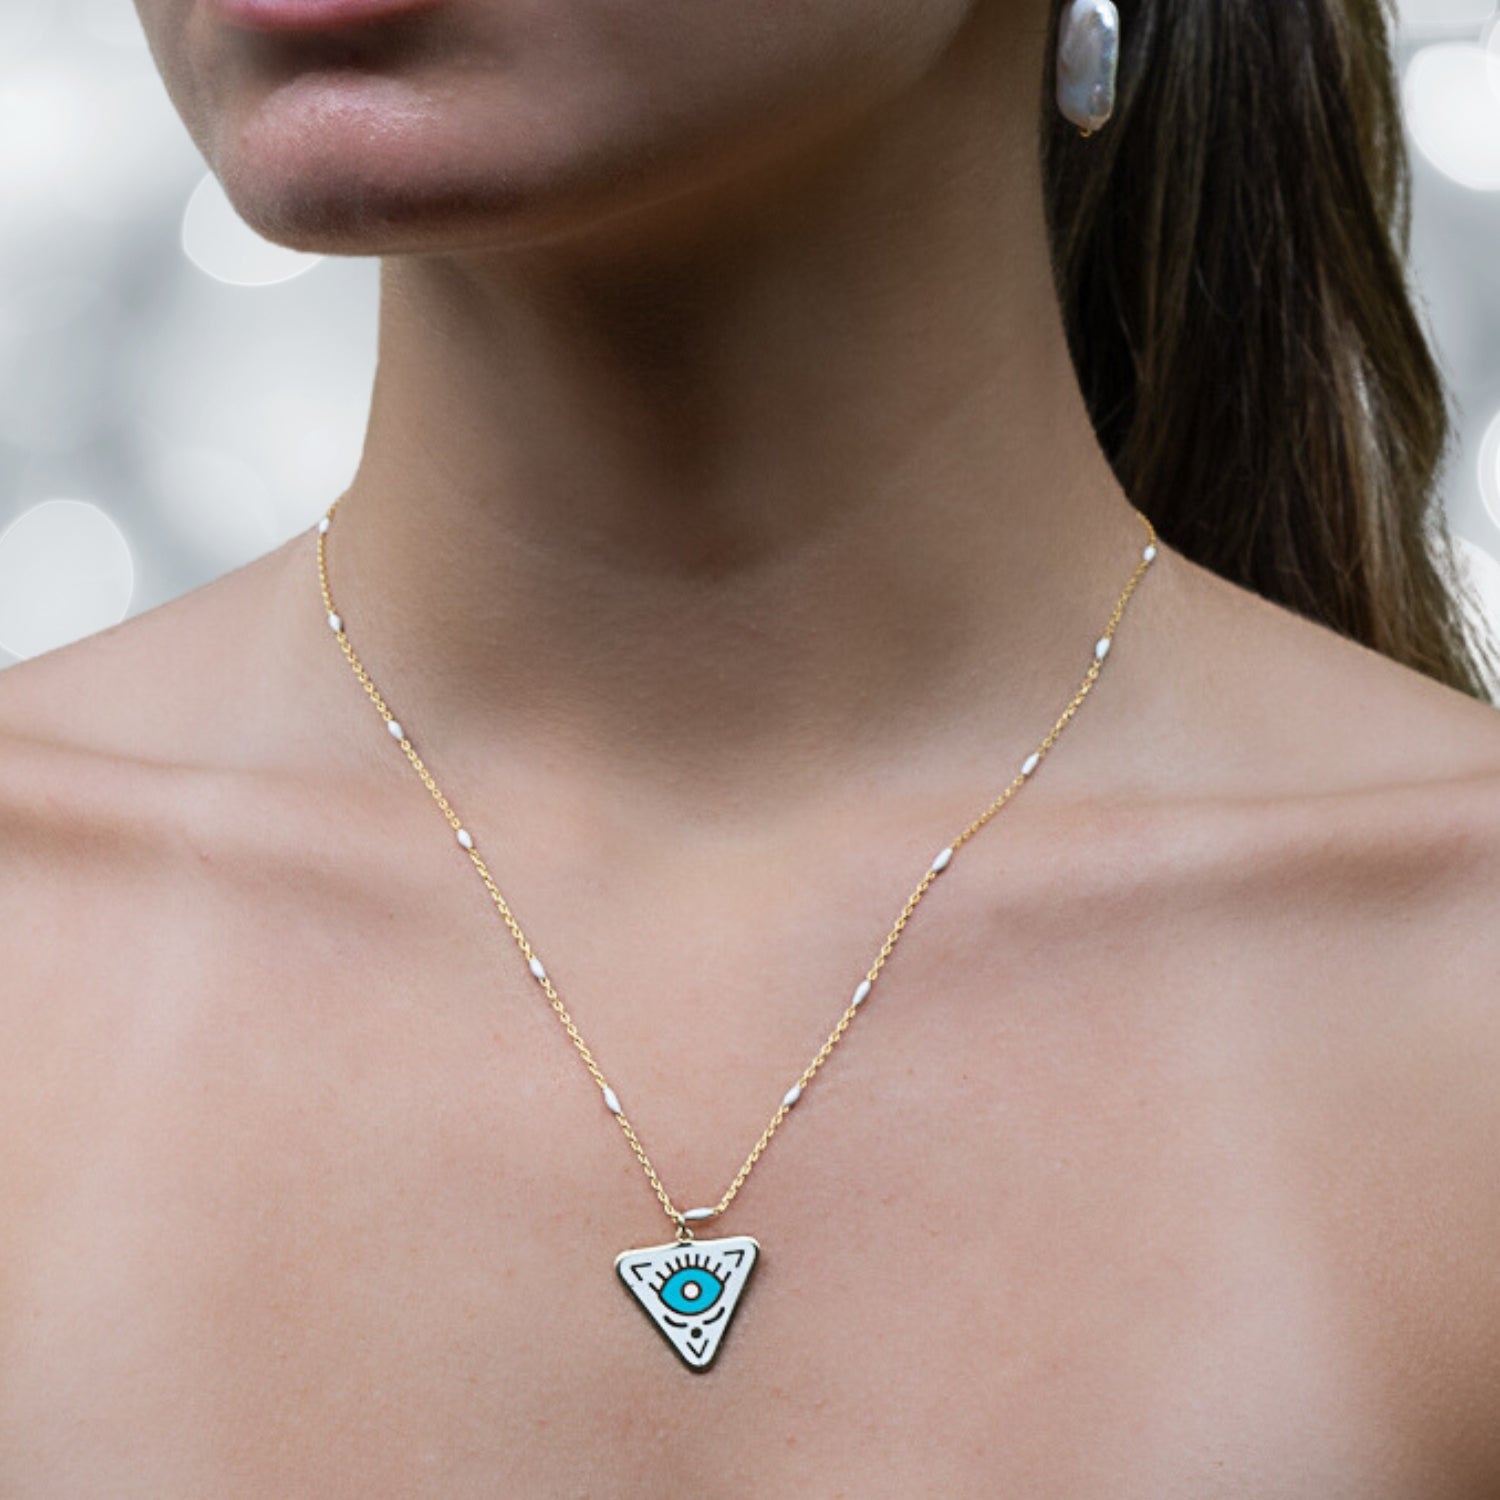 Embrace the Positive Energy - The model showcases the necklace's essence.